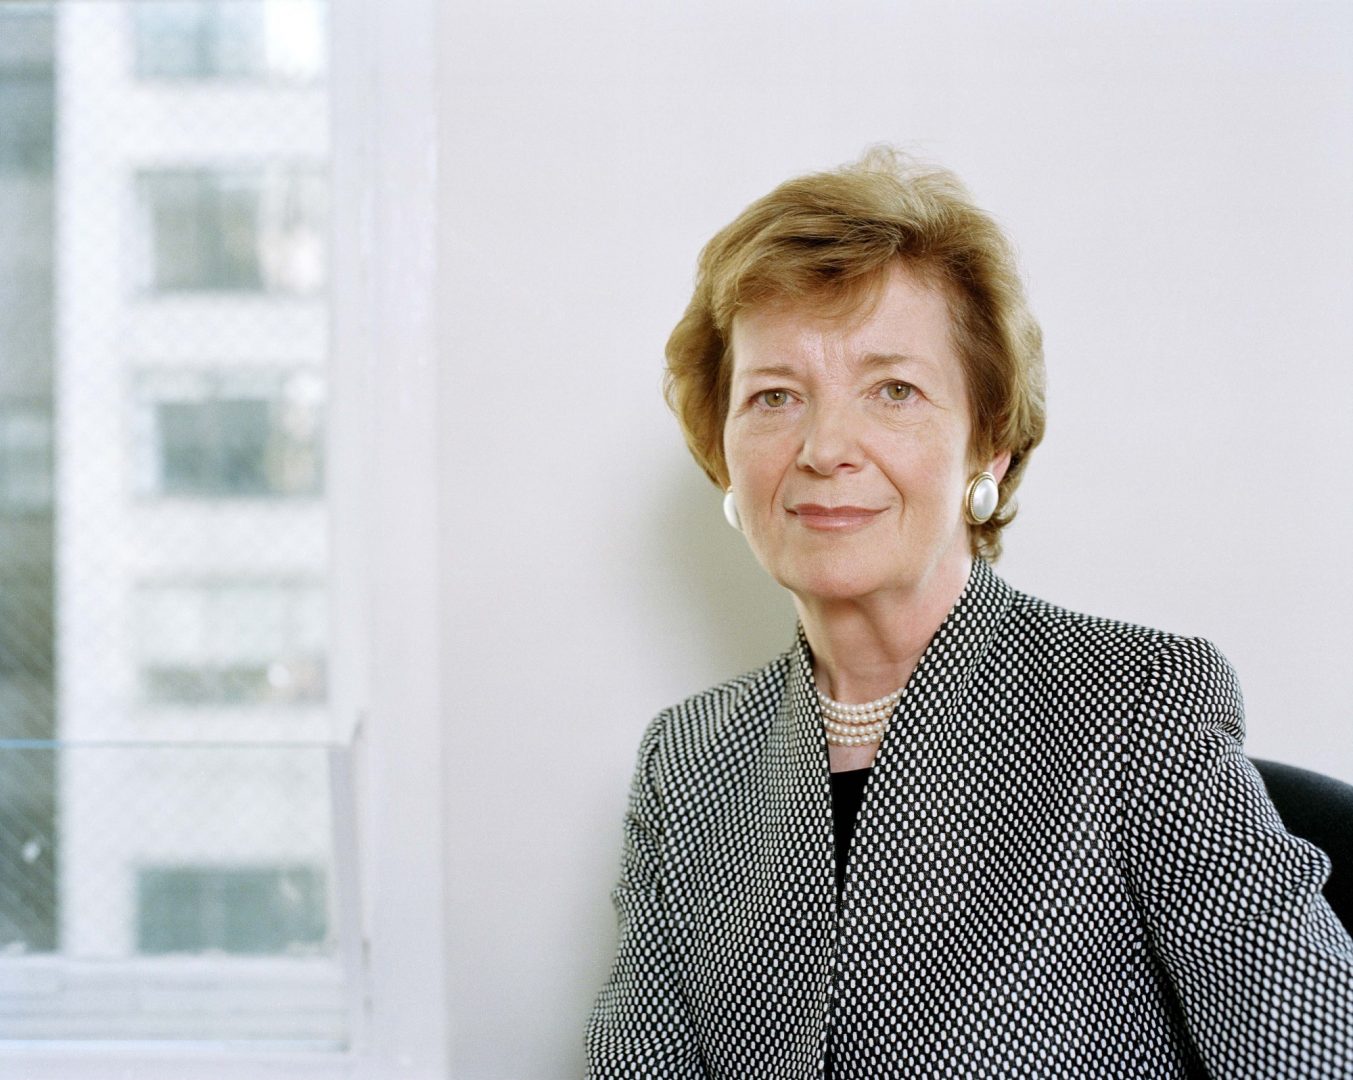 Her Excellency Mary Robinson Guest of Honour of the Academy of Young Diplomats!